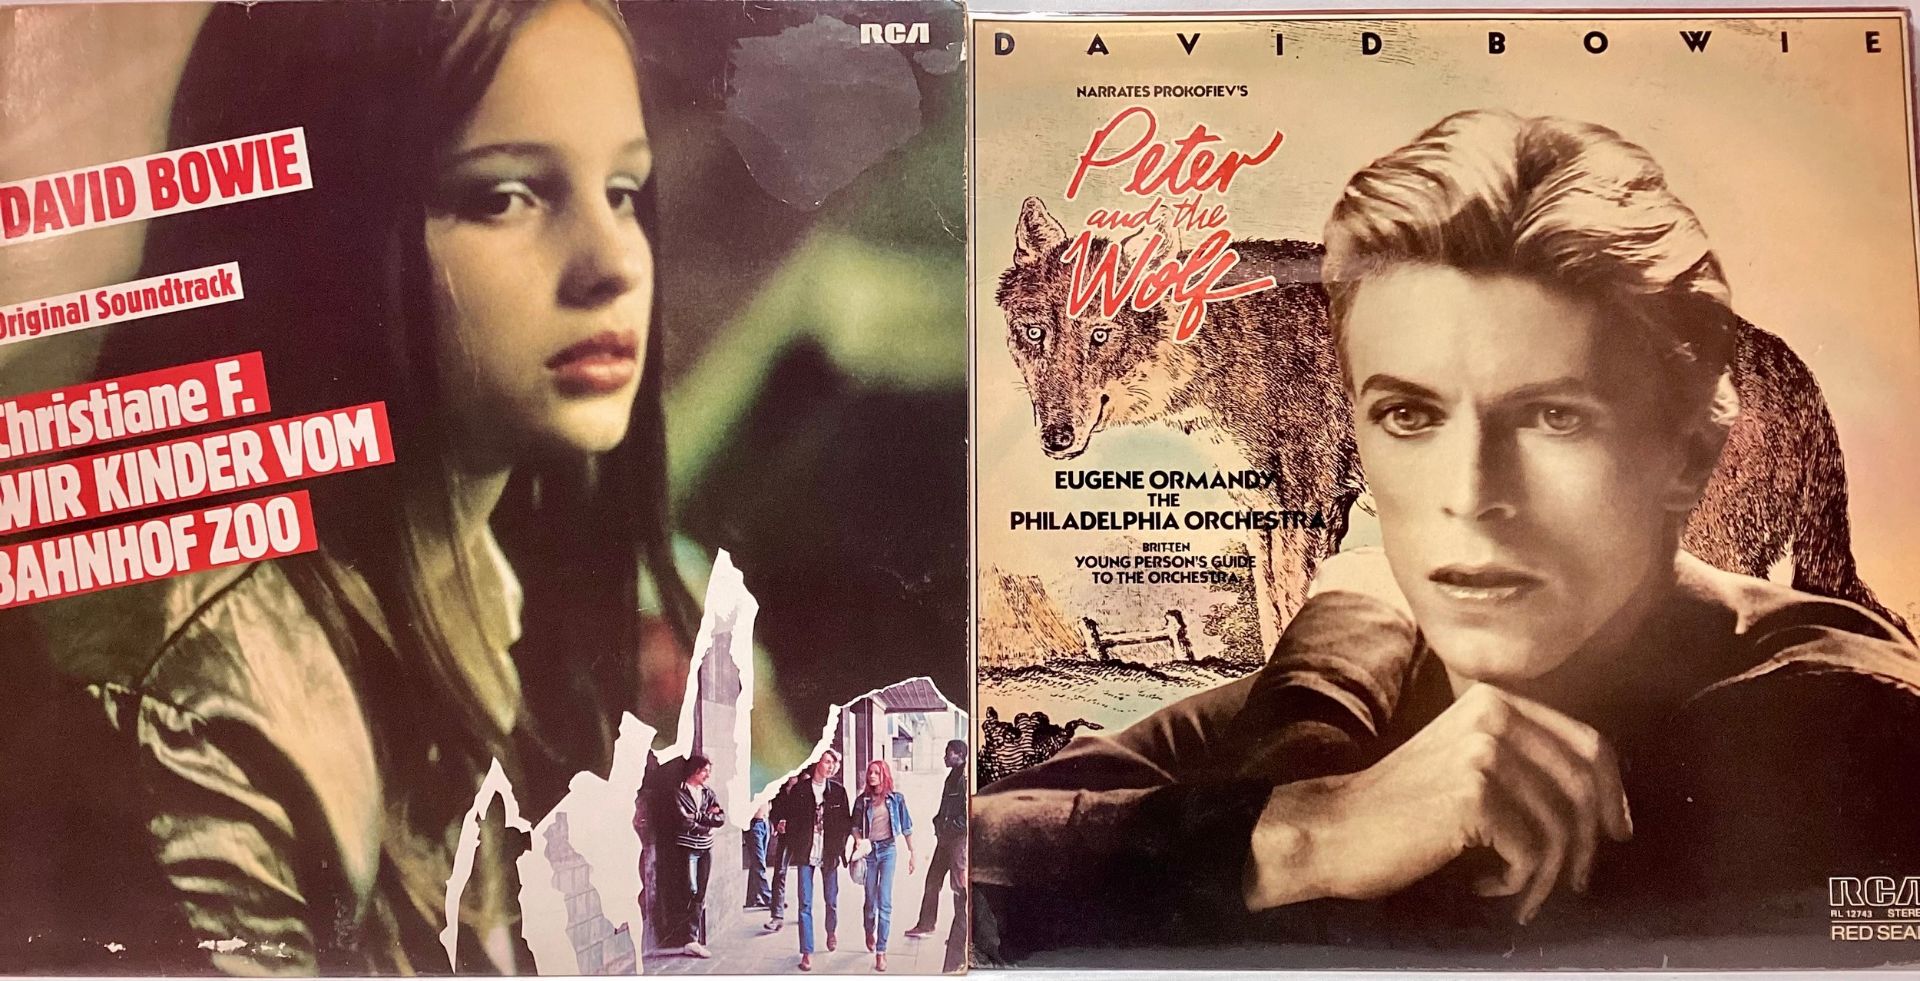 DAVID BOWIE VINYL RECORDS ‘YOUNG PERSONS GUIDE TO THE ORCHESTRA AND CHRISTIANE F’. Both vinyl albums